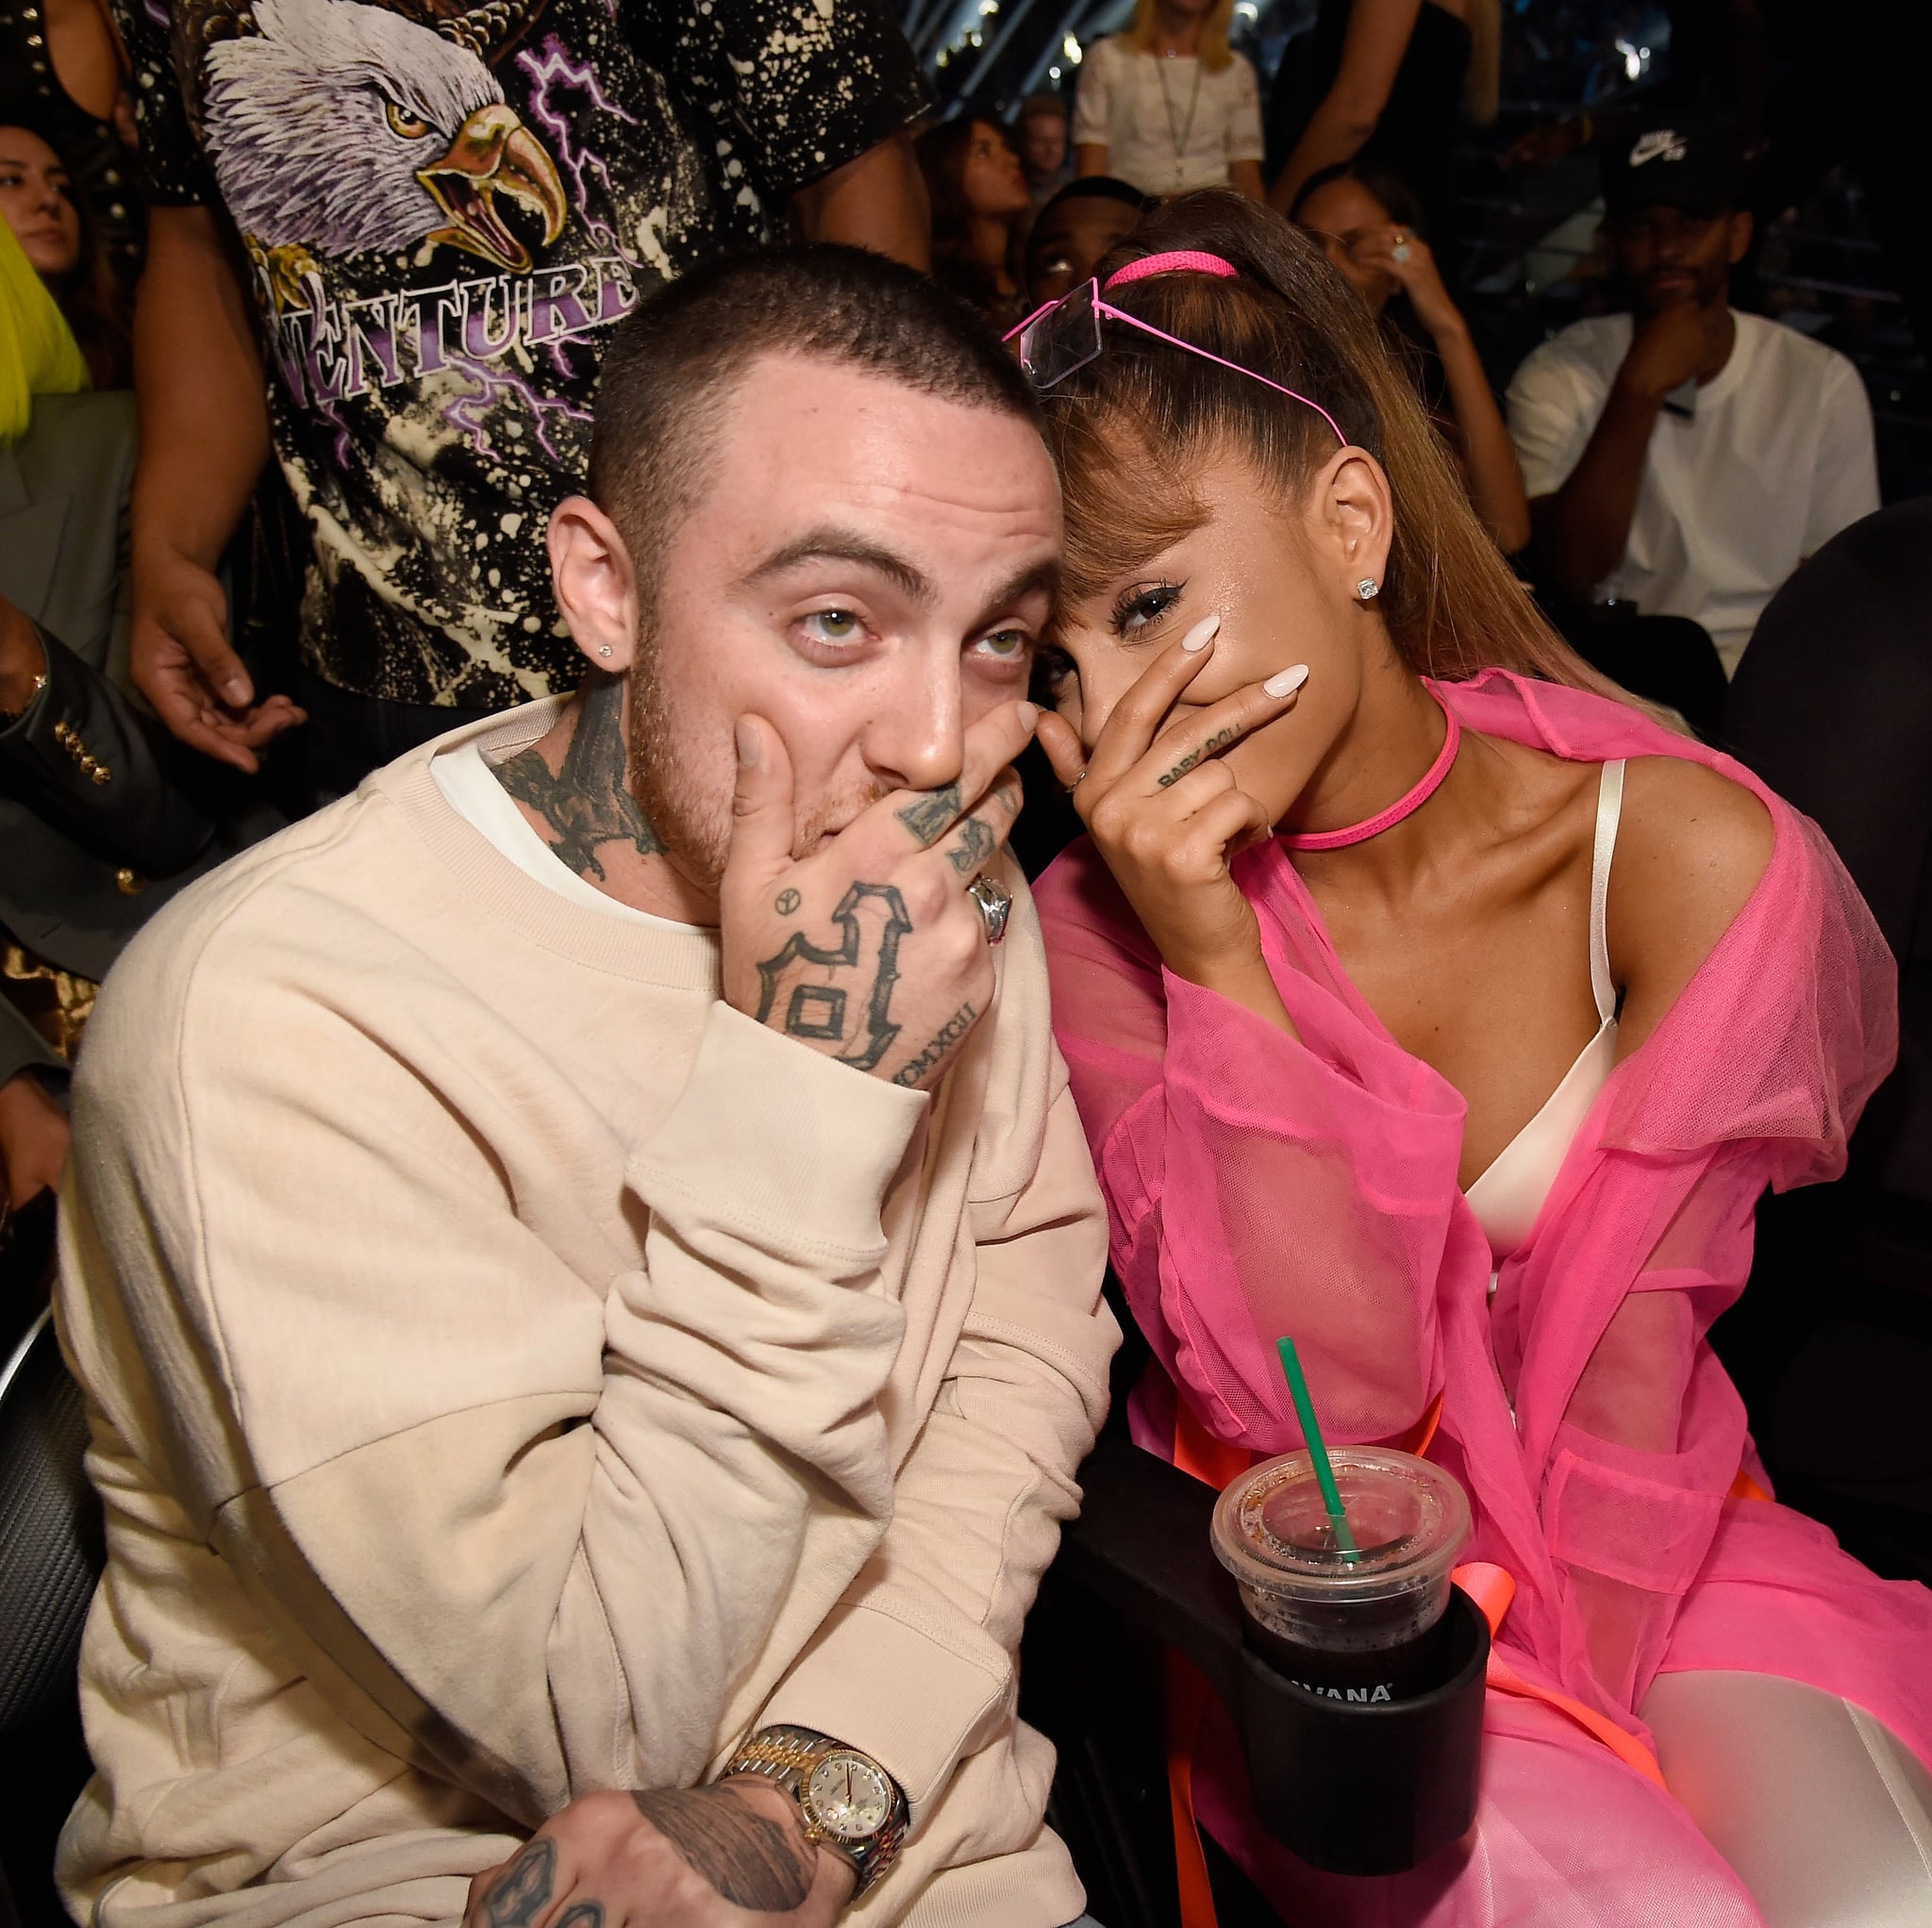 NEW YORK, NY - AUGUST 28:  Mac Miller and Ariana Grande sit in the audience at the 2016 MTV Video Music Awards at Madison Square Garden on August 28, 2016 in New York City.  (Photo by Kevin Mazur/WireImage)